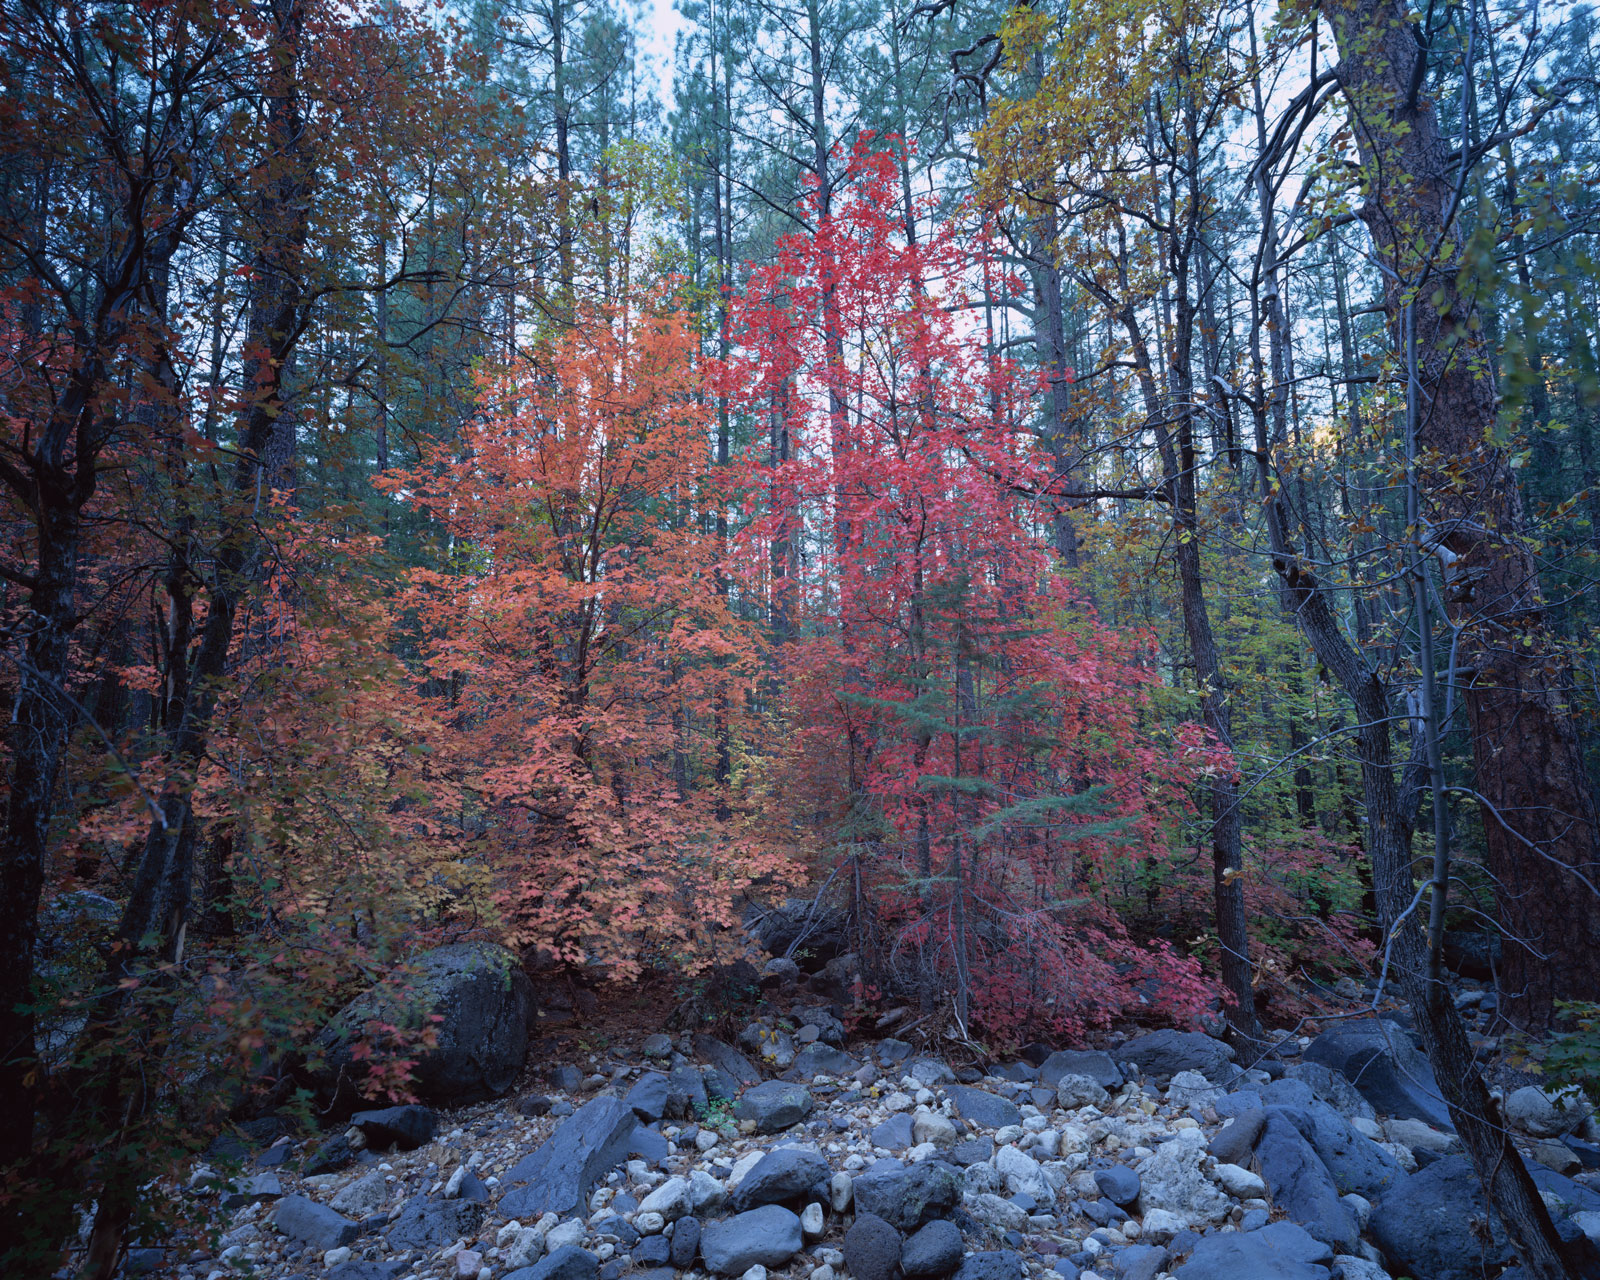 Orange and red leaves on 2 Maples near Cave Springs in Oak Creek Canyon